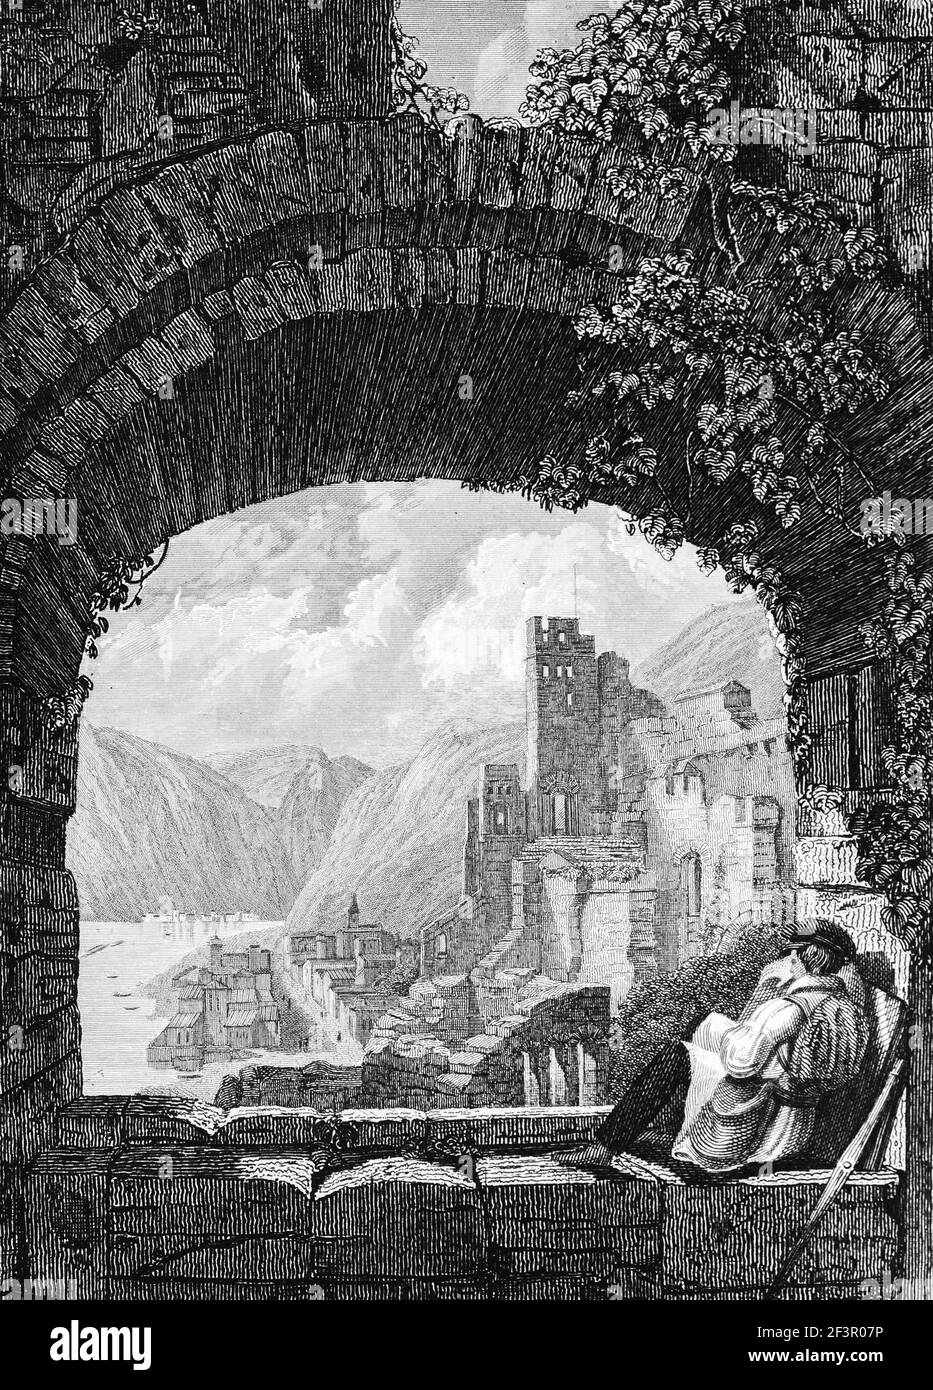 View from the ruins of castle Rheinfels onto the village of St. Goar on the Rhine River, Rhineland-Palatinate, Germany, Steel engraving of 1832 Stock Photo